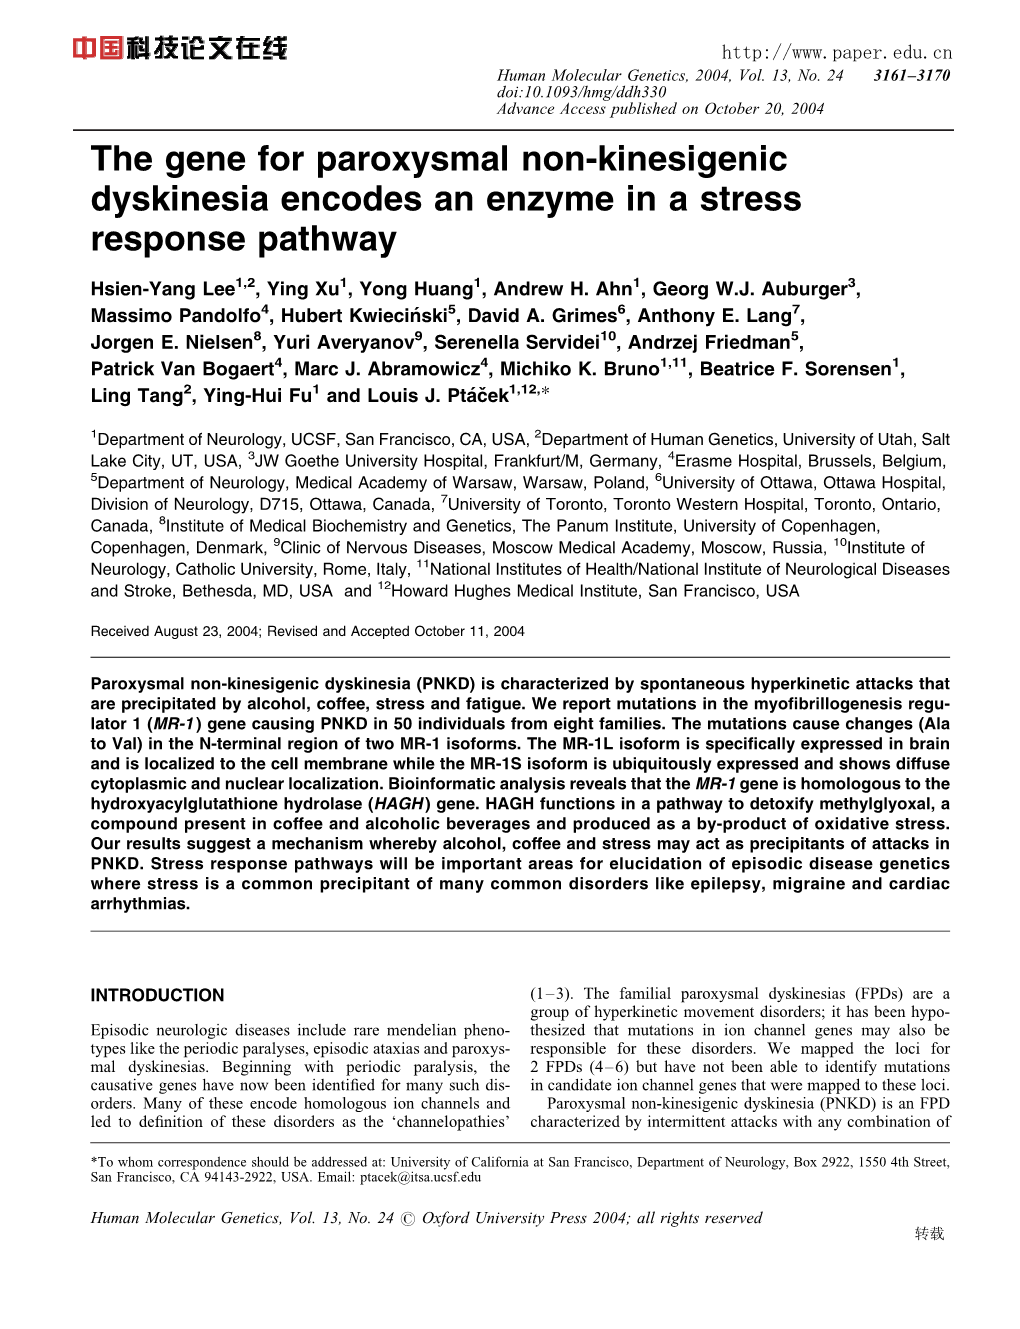 The Gene for Paroxysmal Non-Kinesigenic Dyskinesia Encodes an Enzyme in a Stress Response Pathway